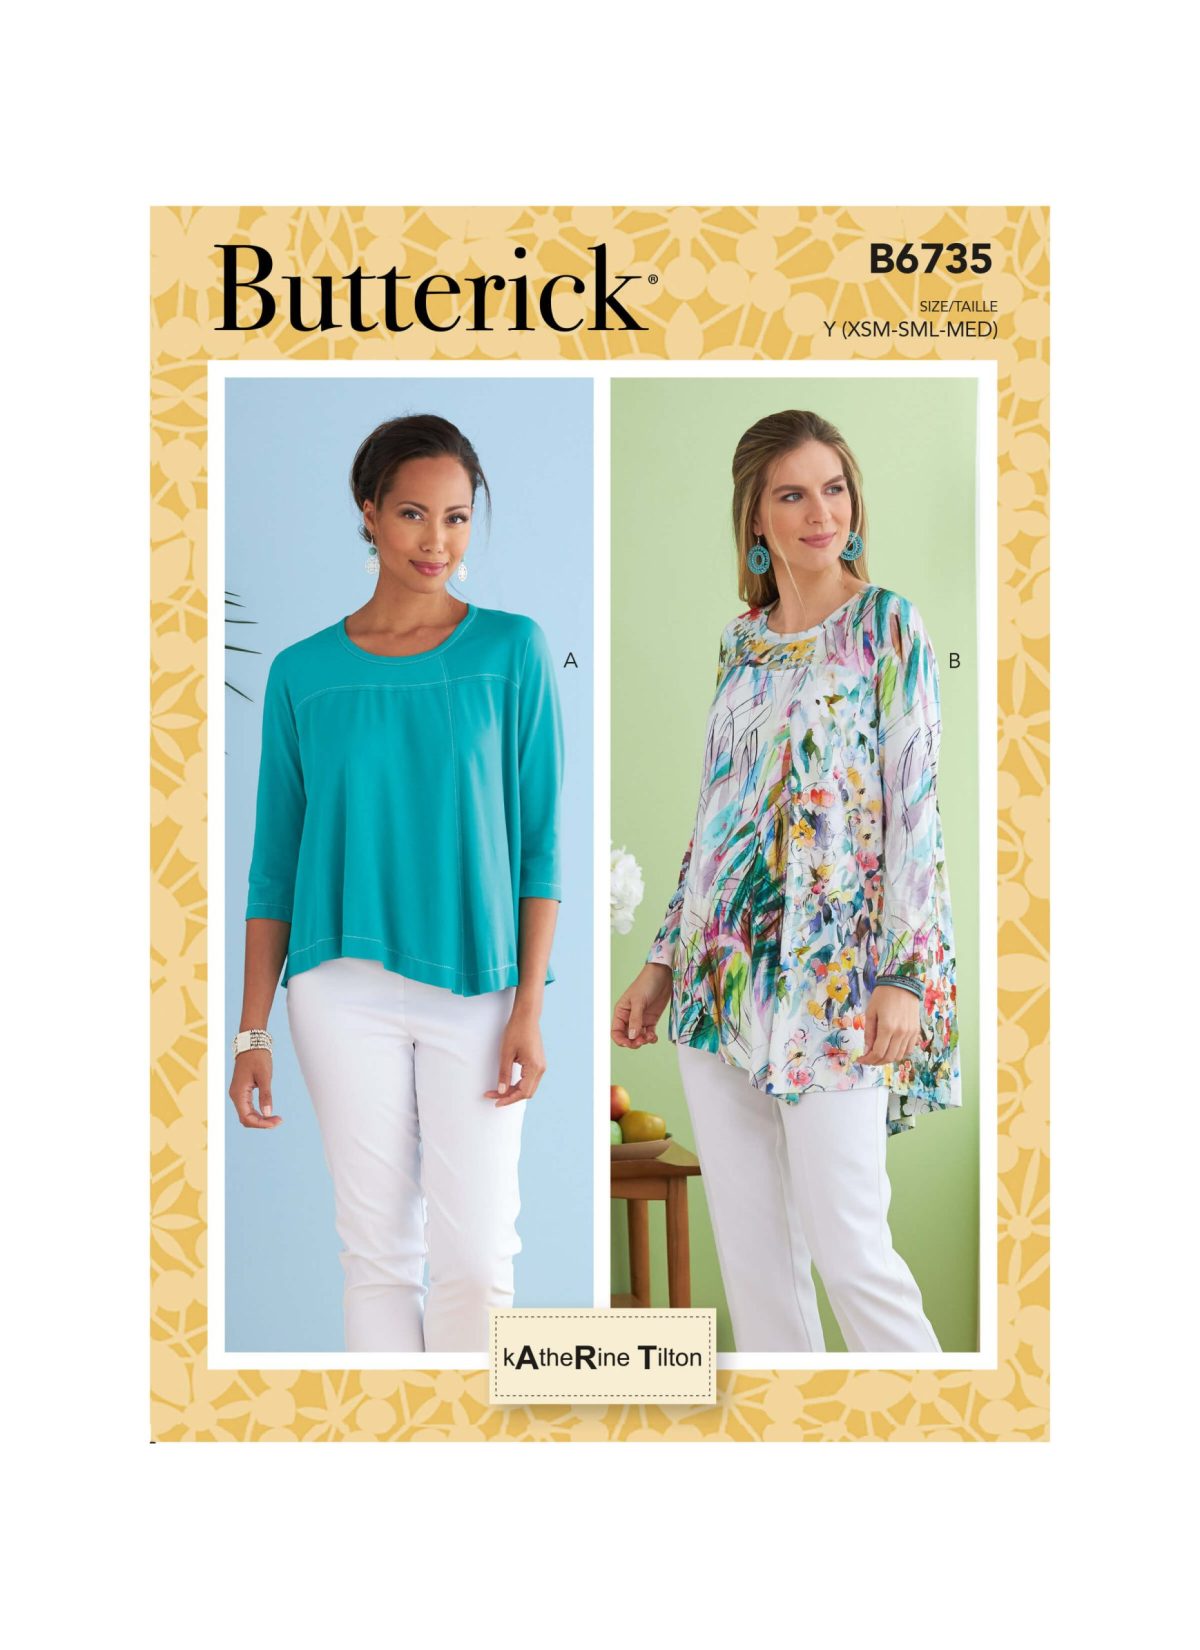 Butterick Sewing Pattern B6735 Misses' Top